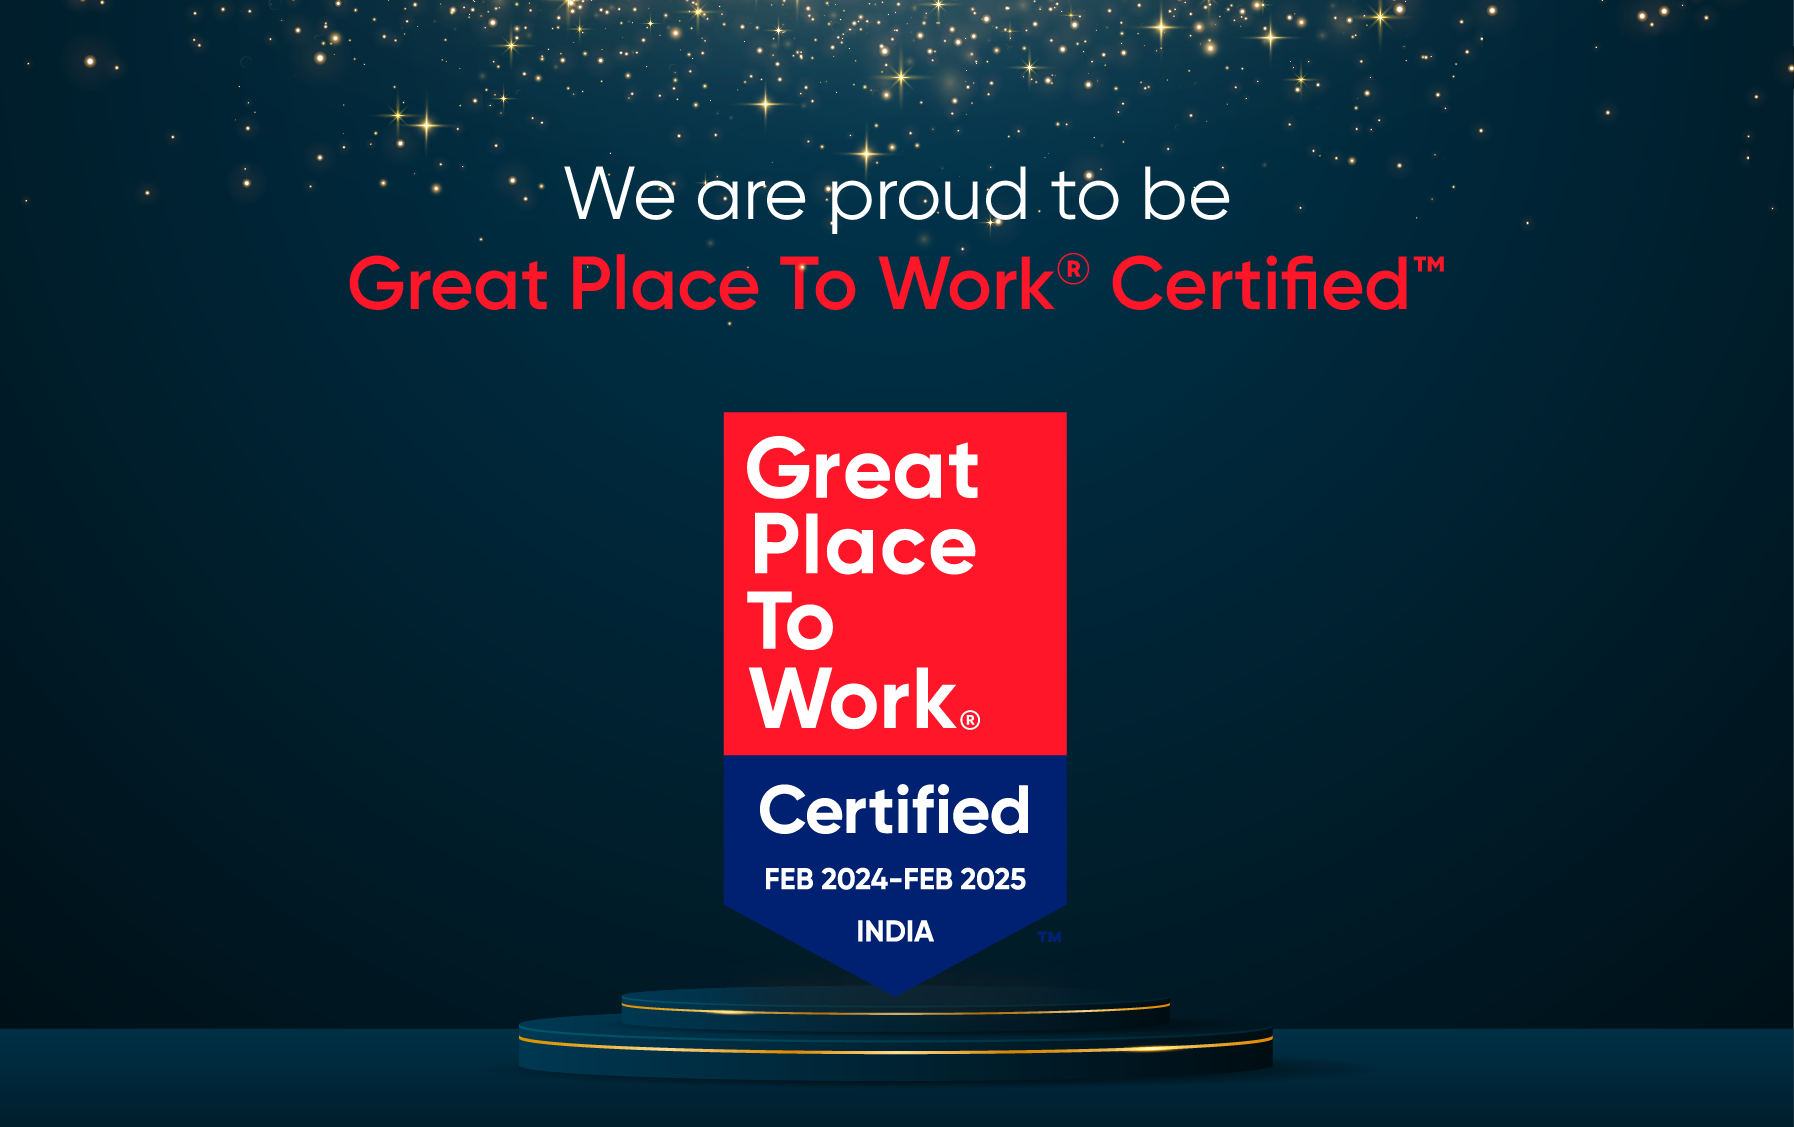 MRCC Group is Now Great Place To Work® Certified